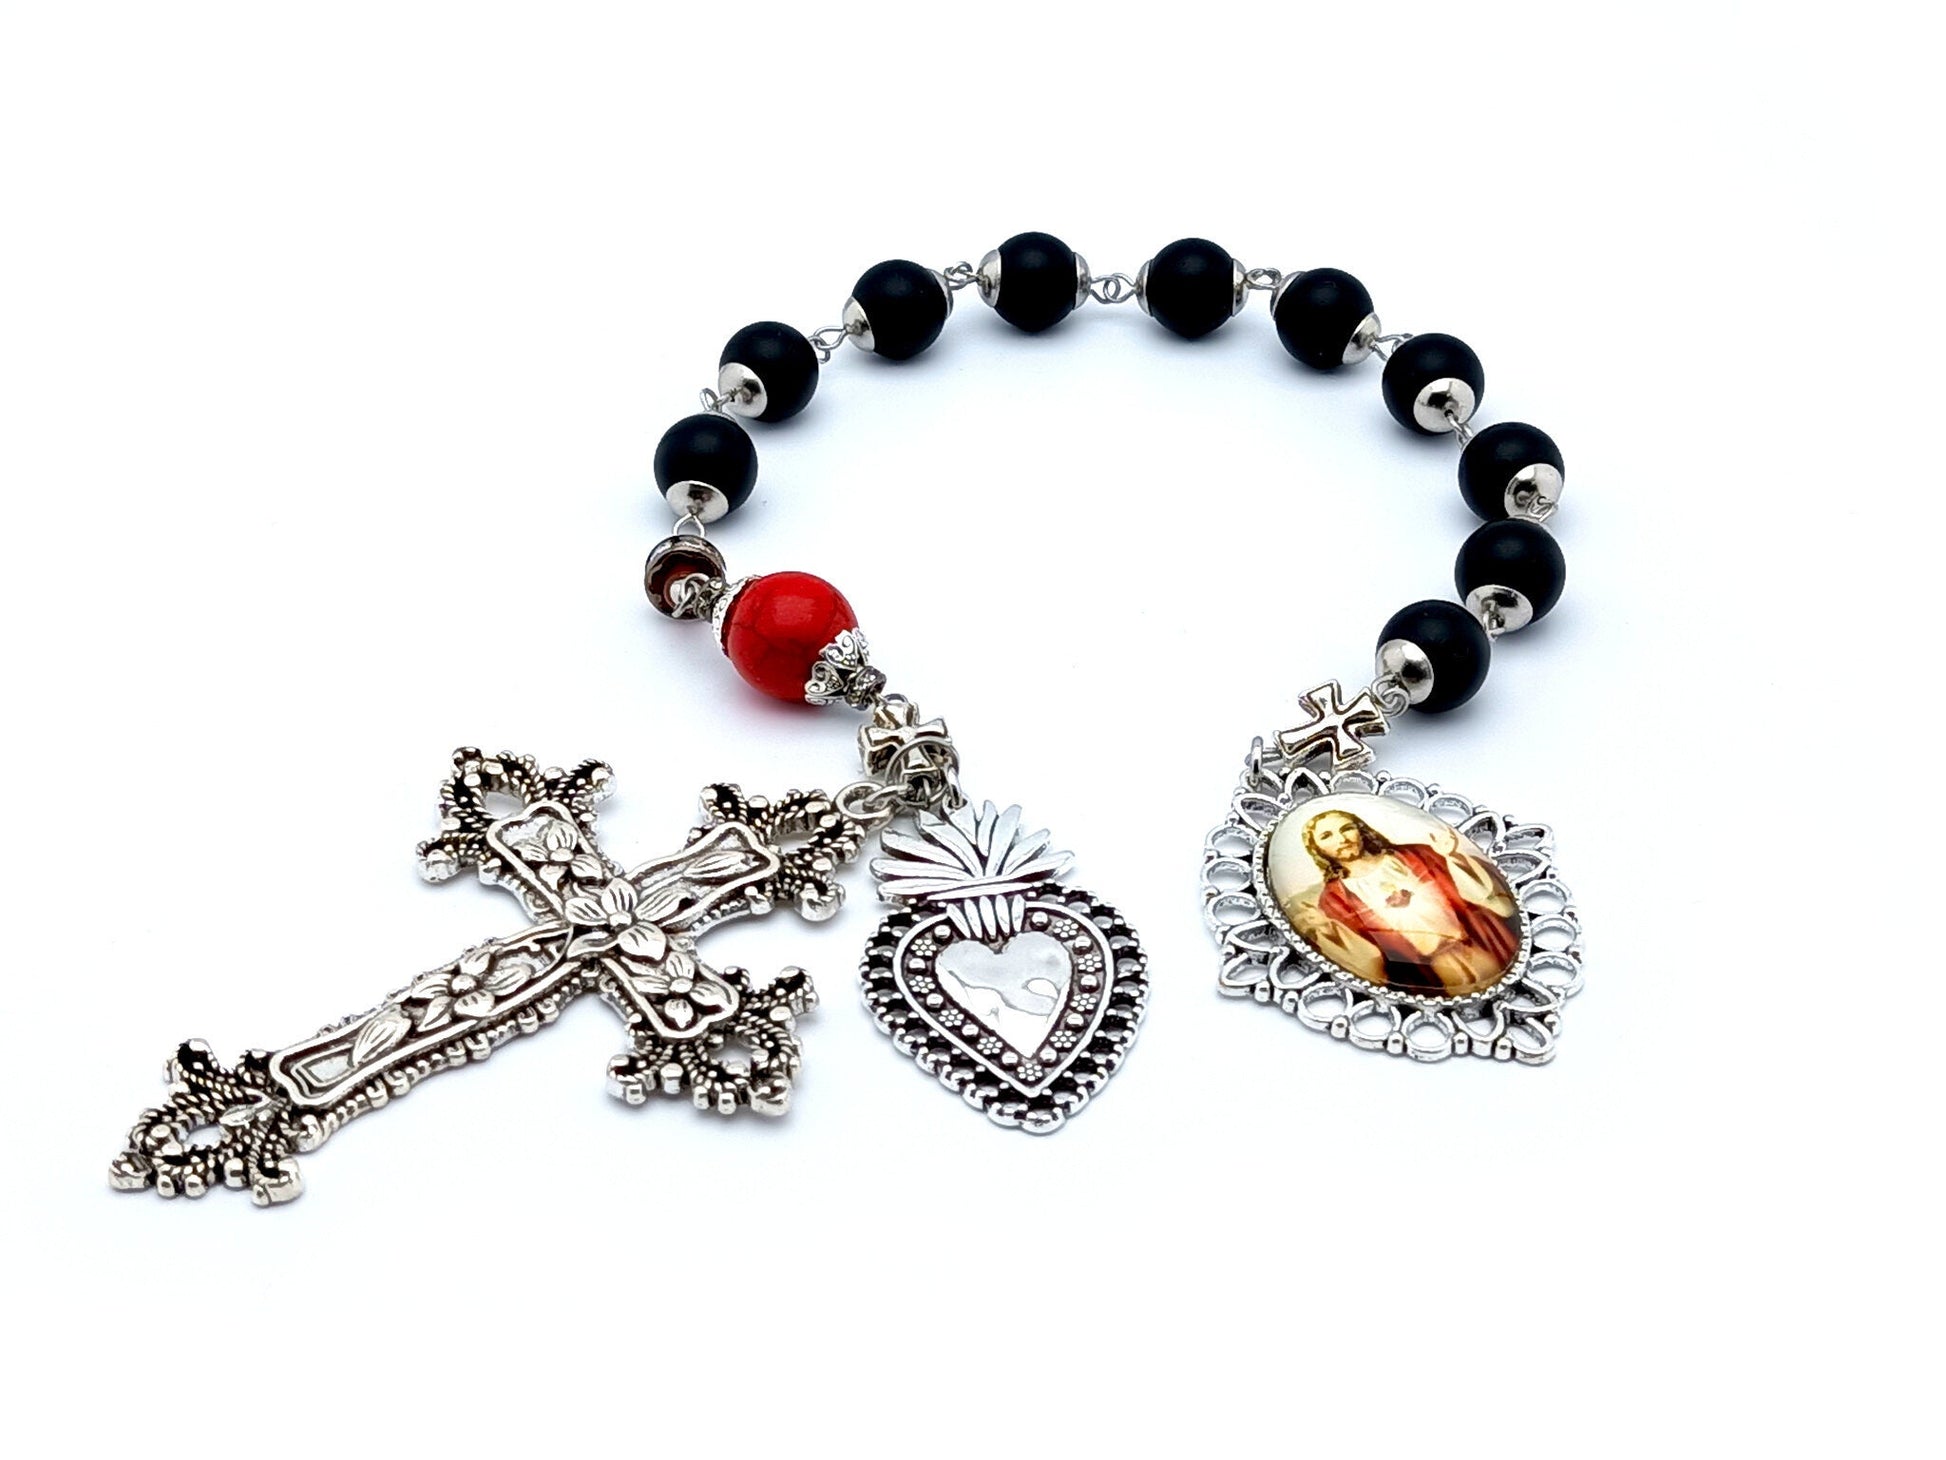 Sacred Heart of Jesus unique rosary beads single decade rosary with matt black onyx gemstone beads, silver cross and Sacred Heart medals.